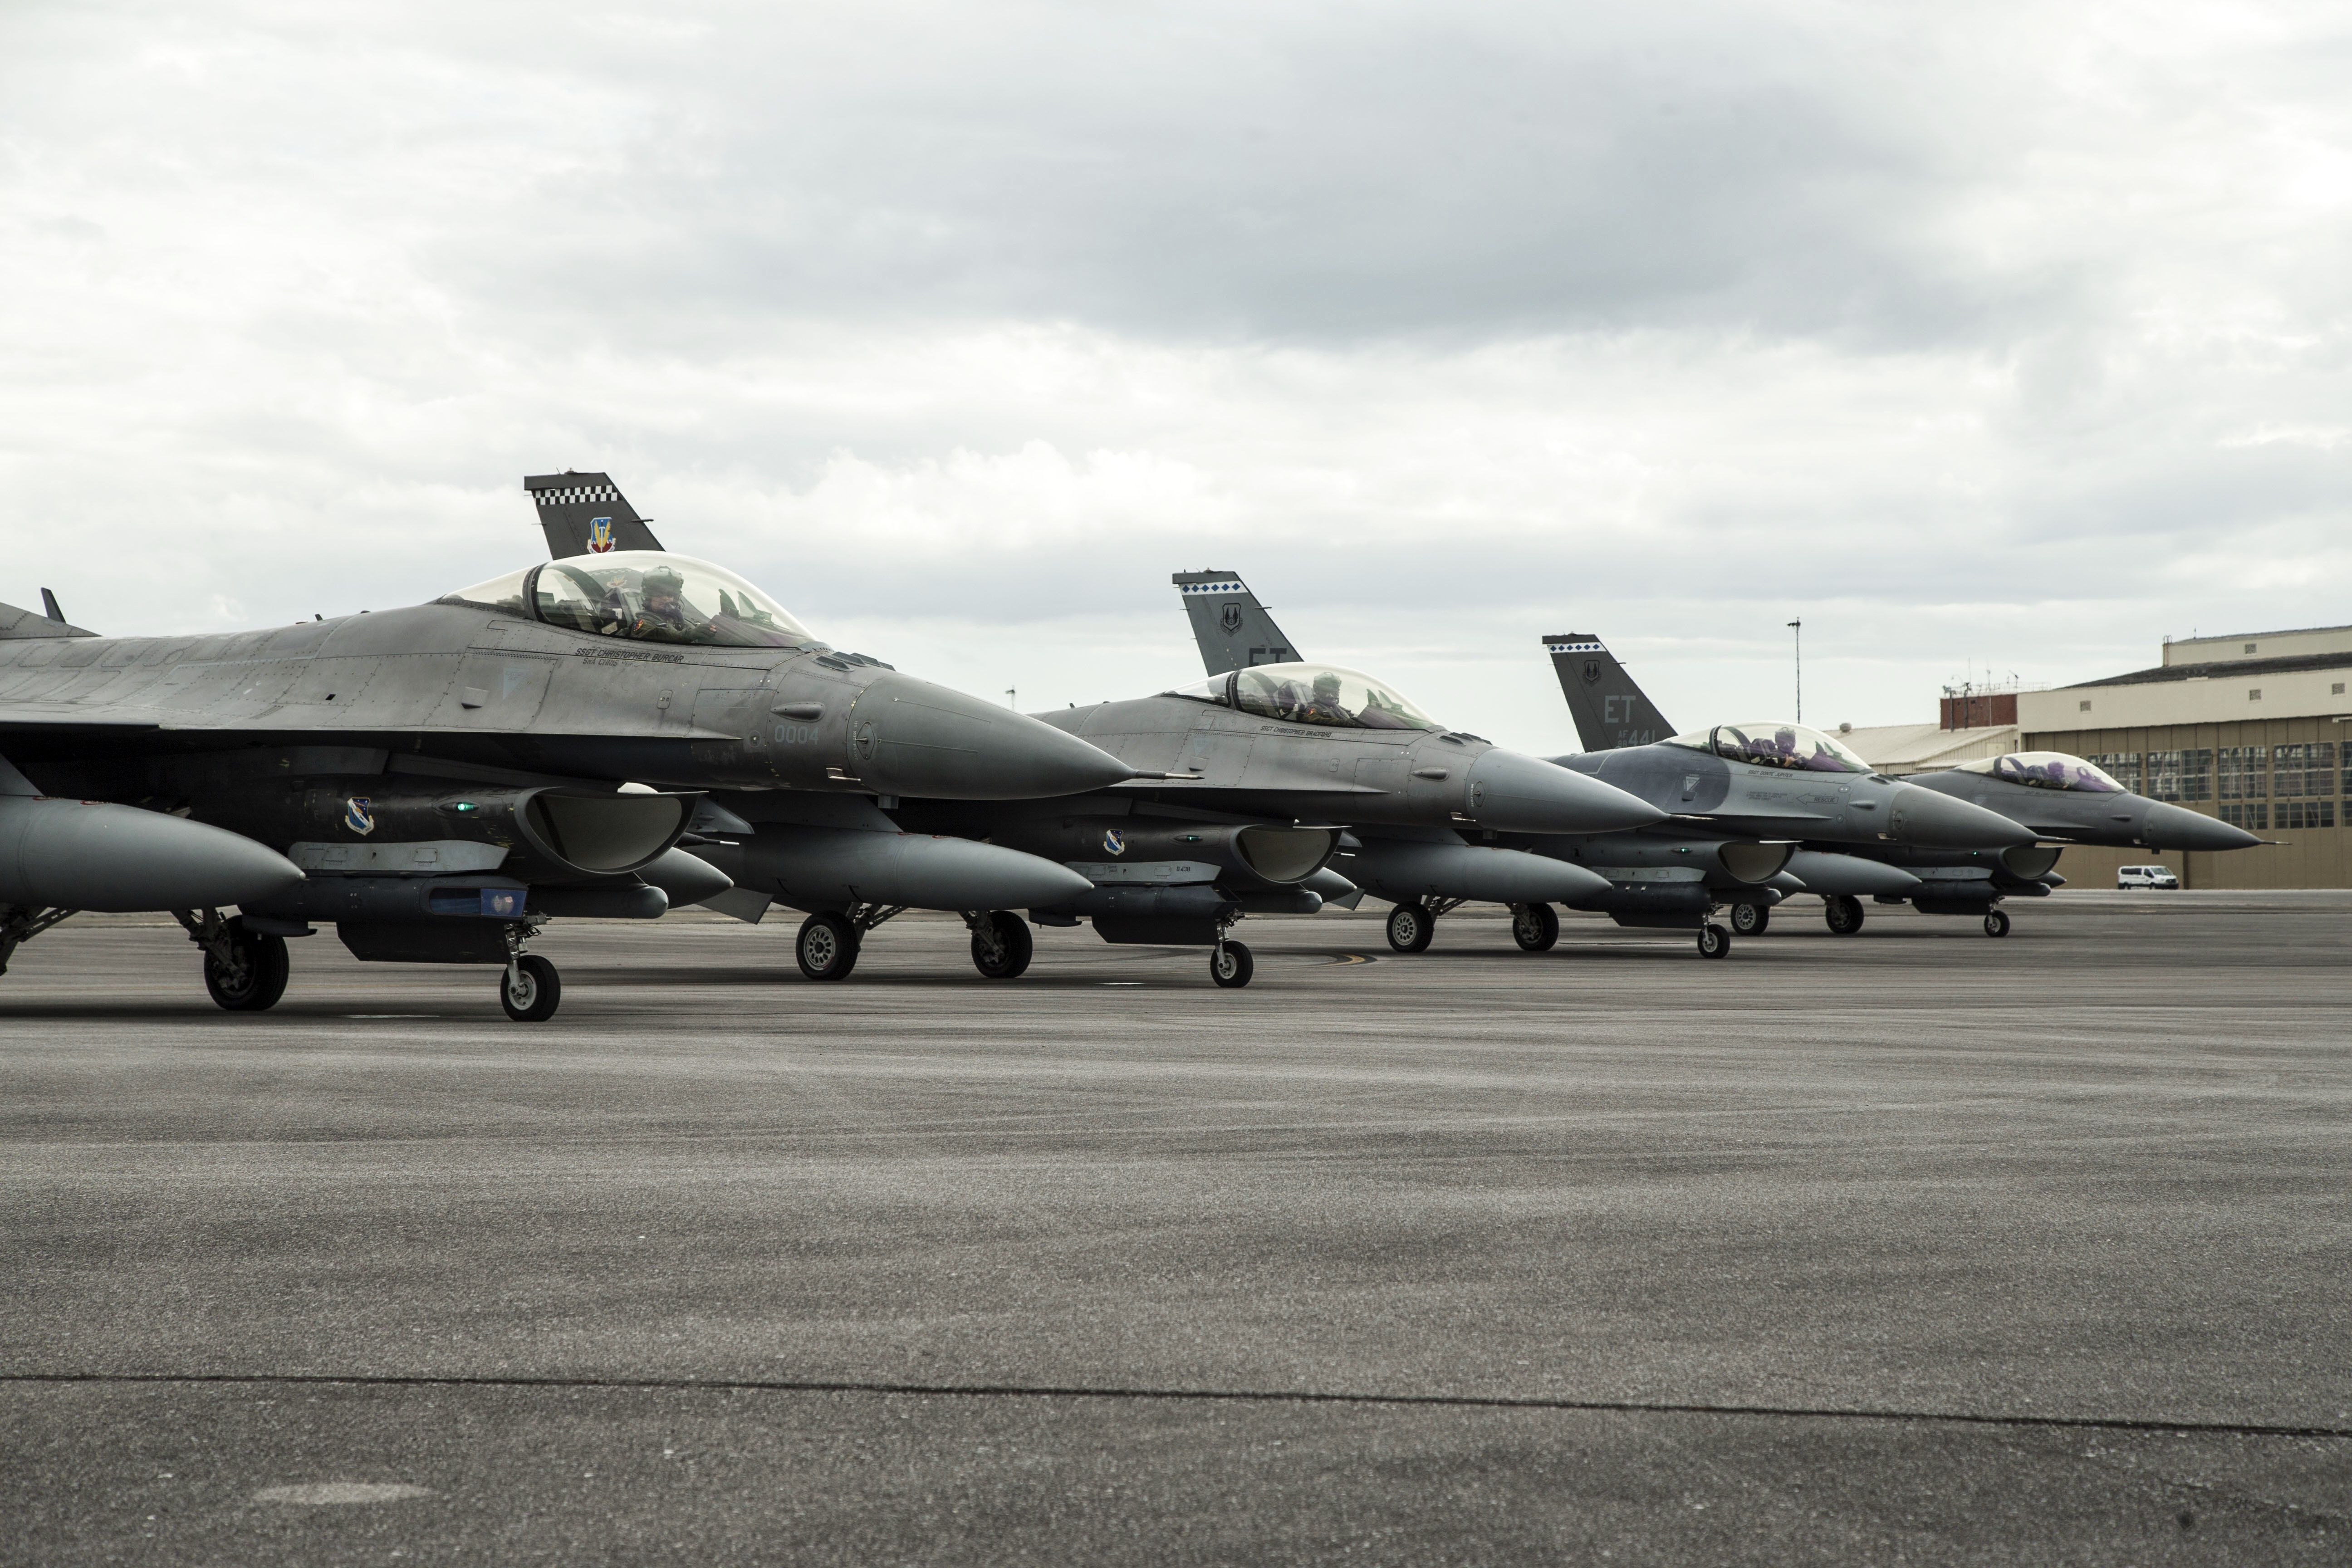 6291322 - F-16 AESA Test [Image 3 of 5] - USAF Test F-16s in a Row